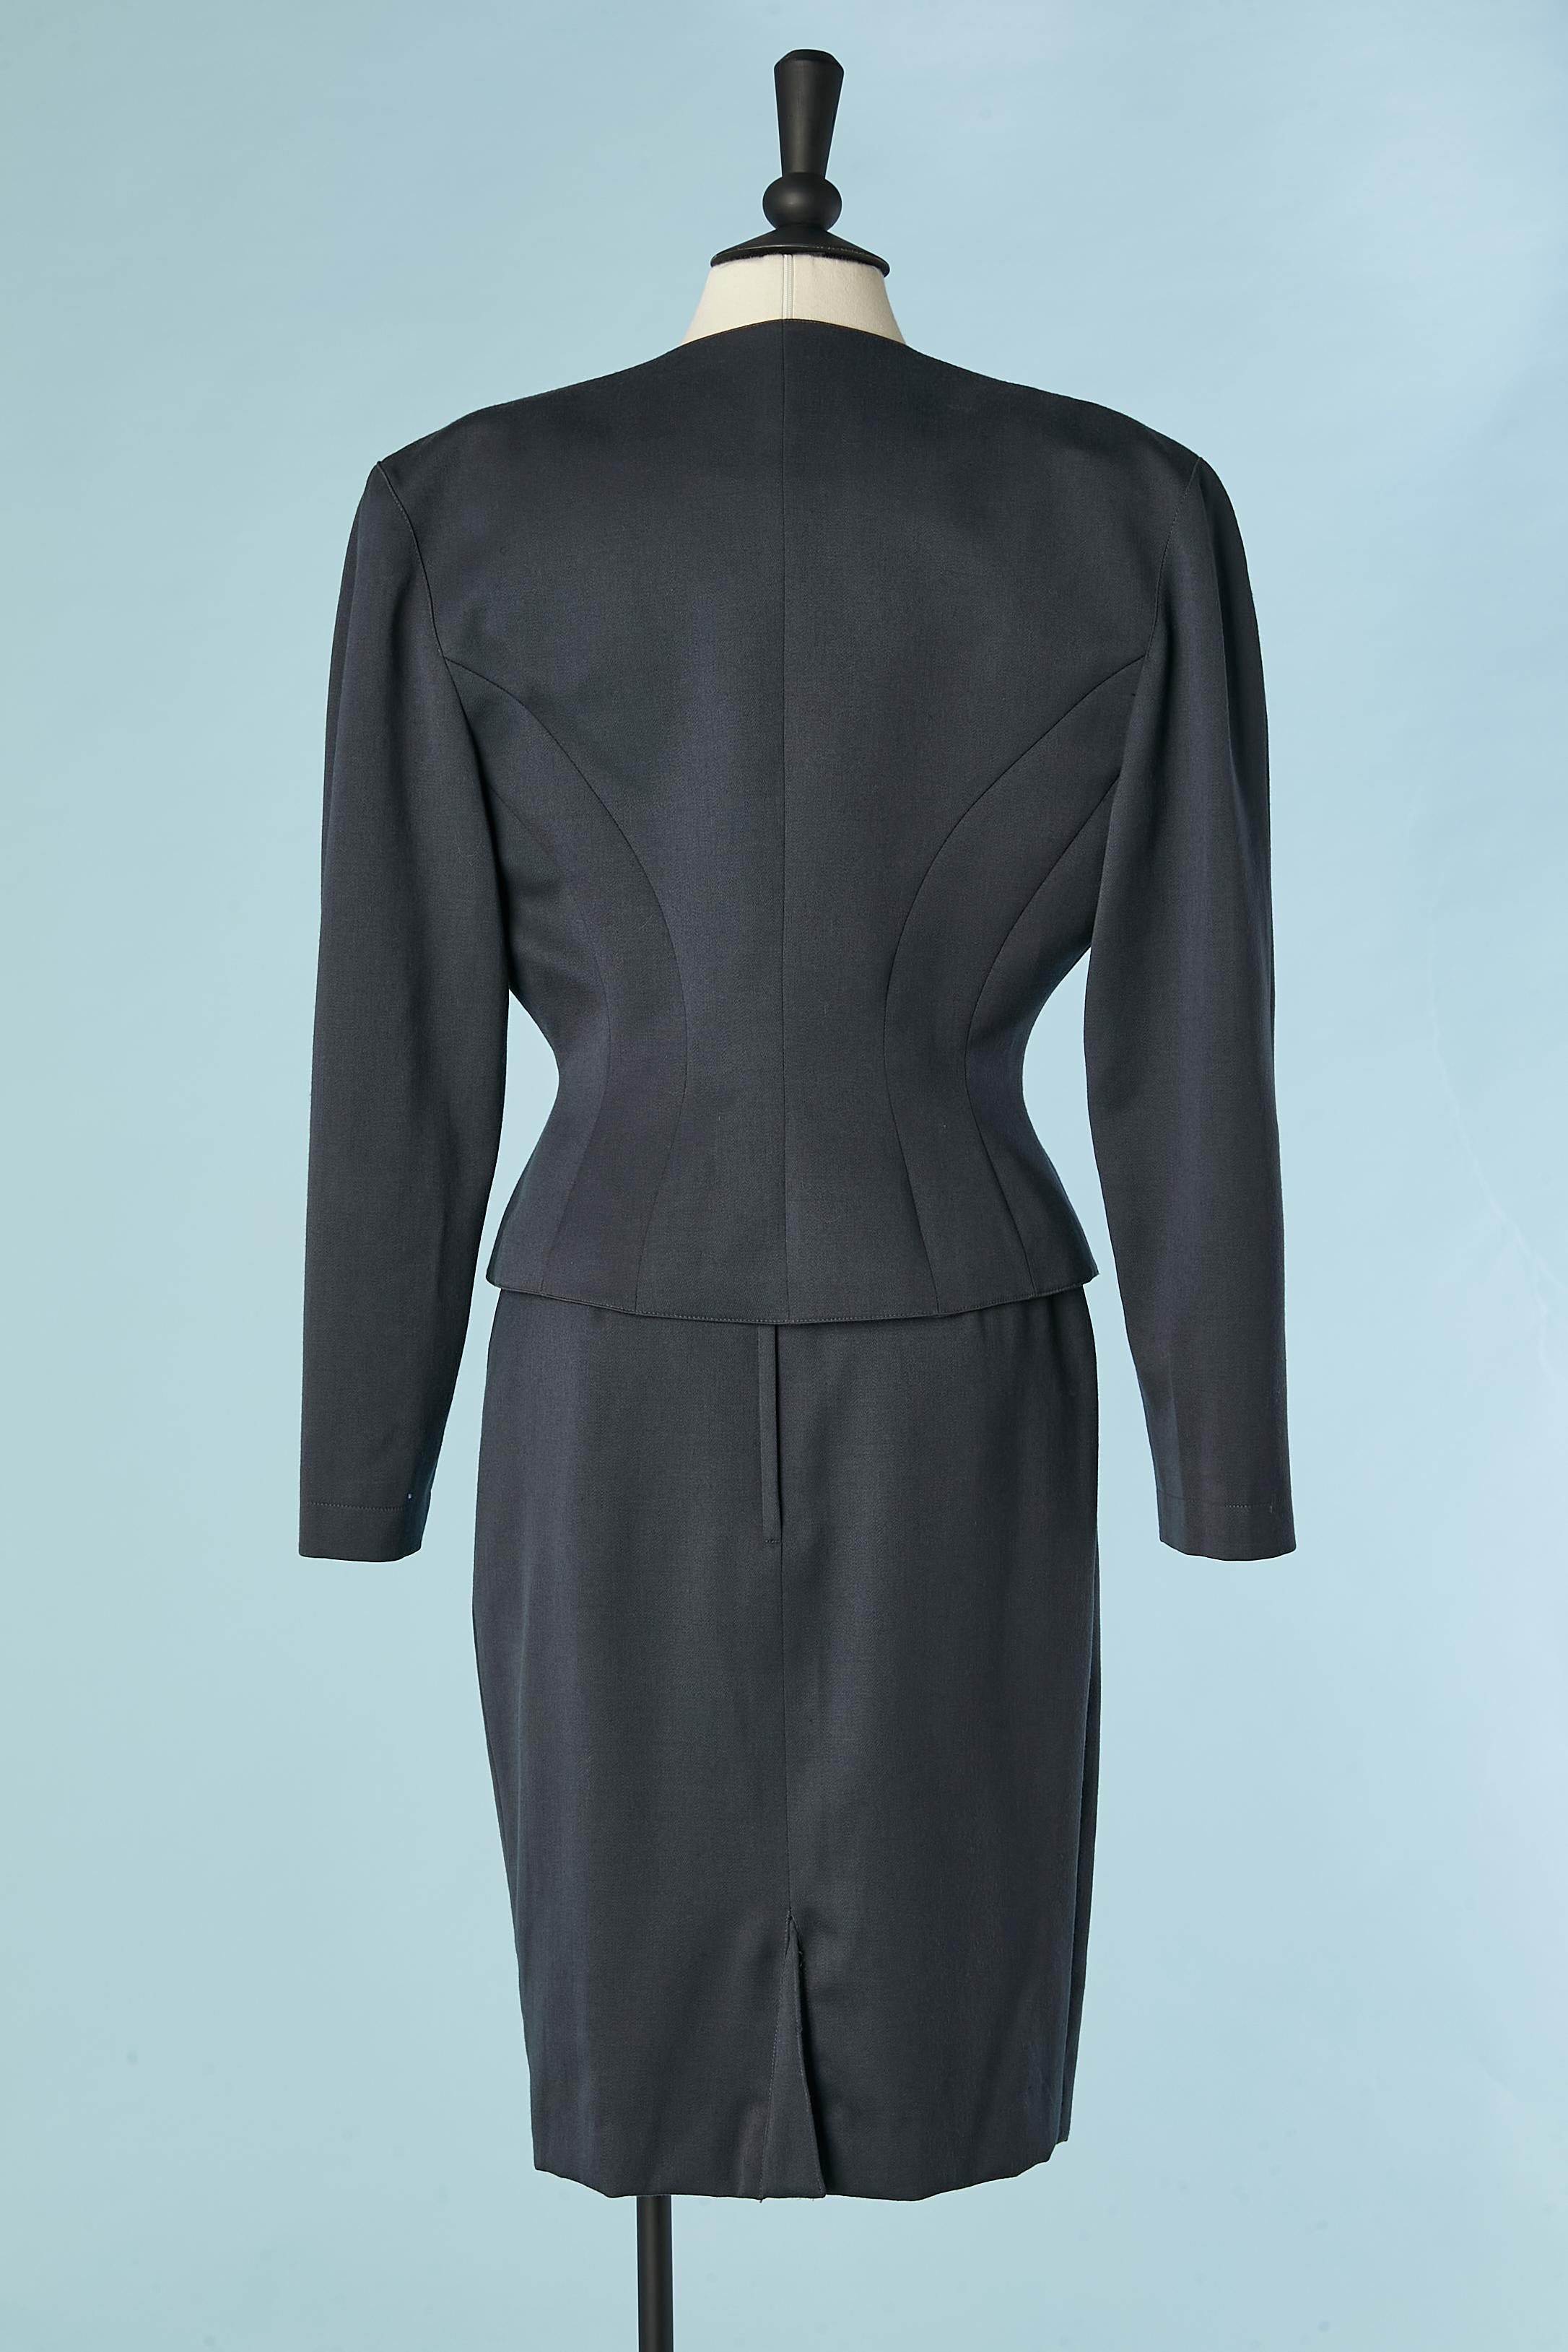 Anthracite grey wool skirt-suit MUGLER by Thierry Mugler  For Sale 1